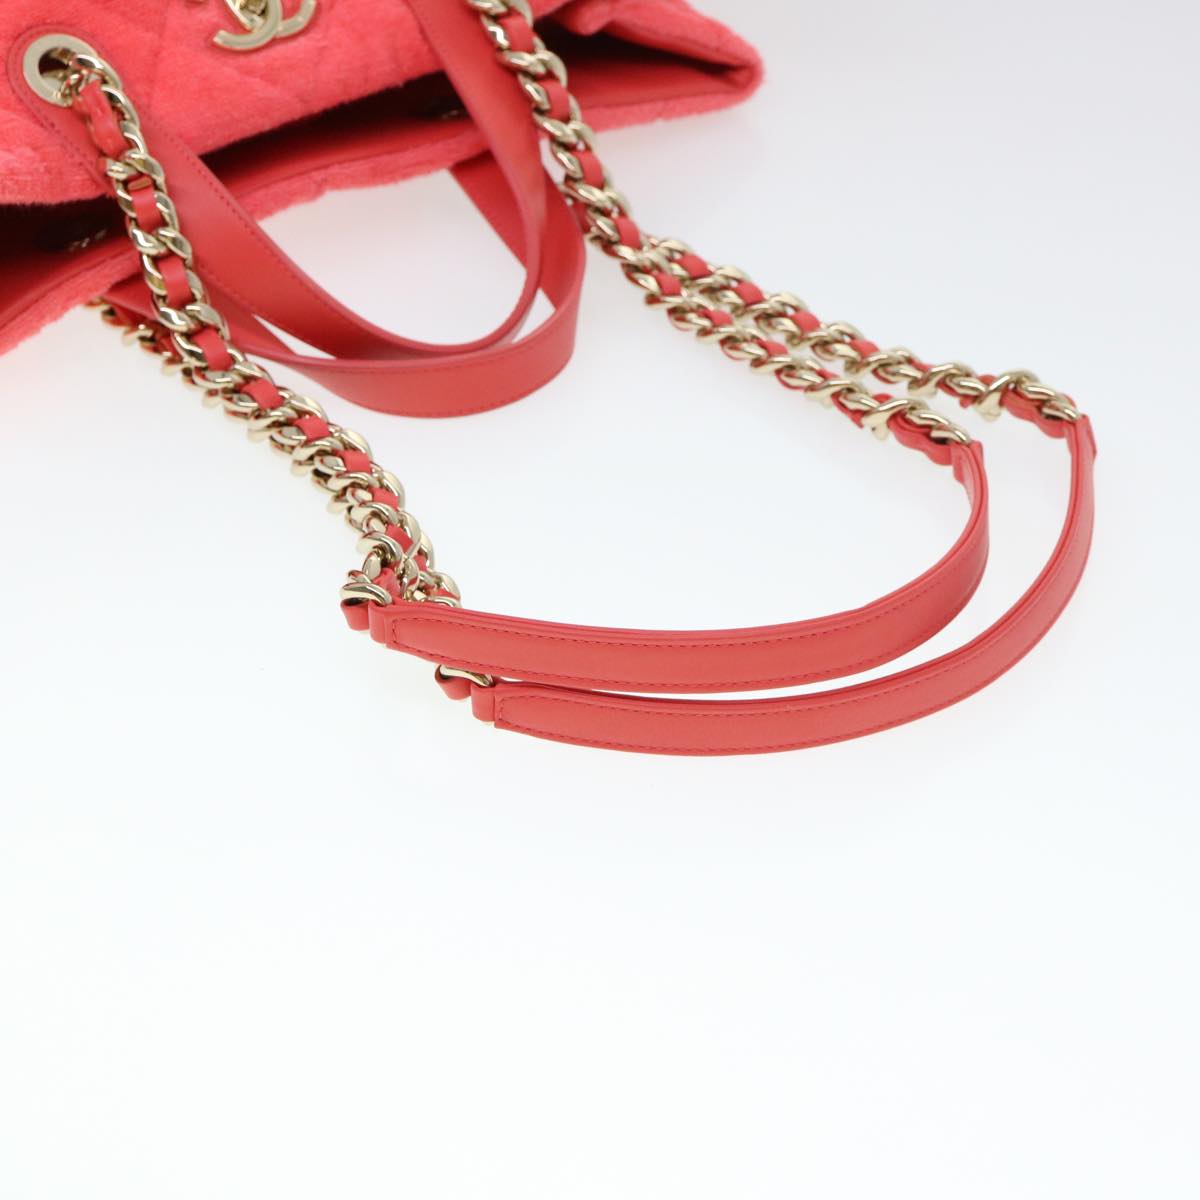 CHANEL Chain Hand Bag Pile 2way Pink CC Auth ar9158A